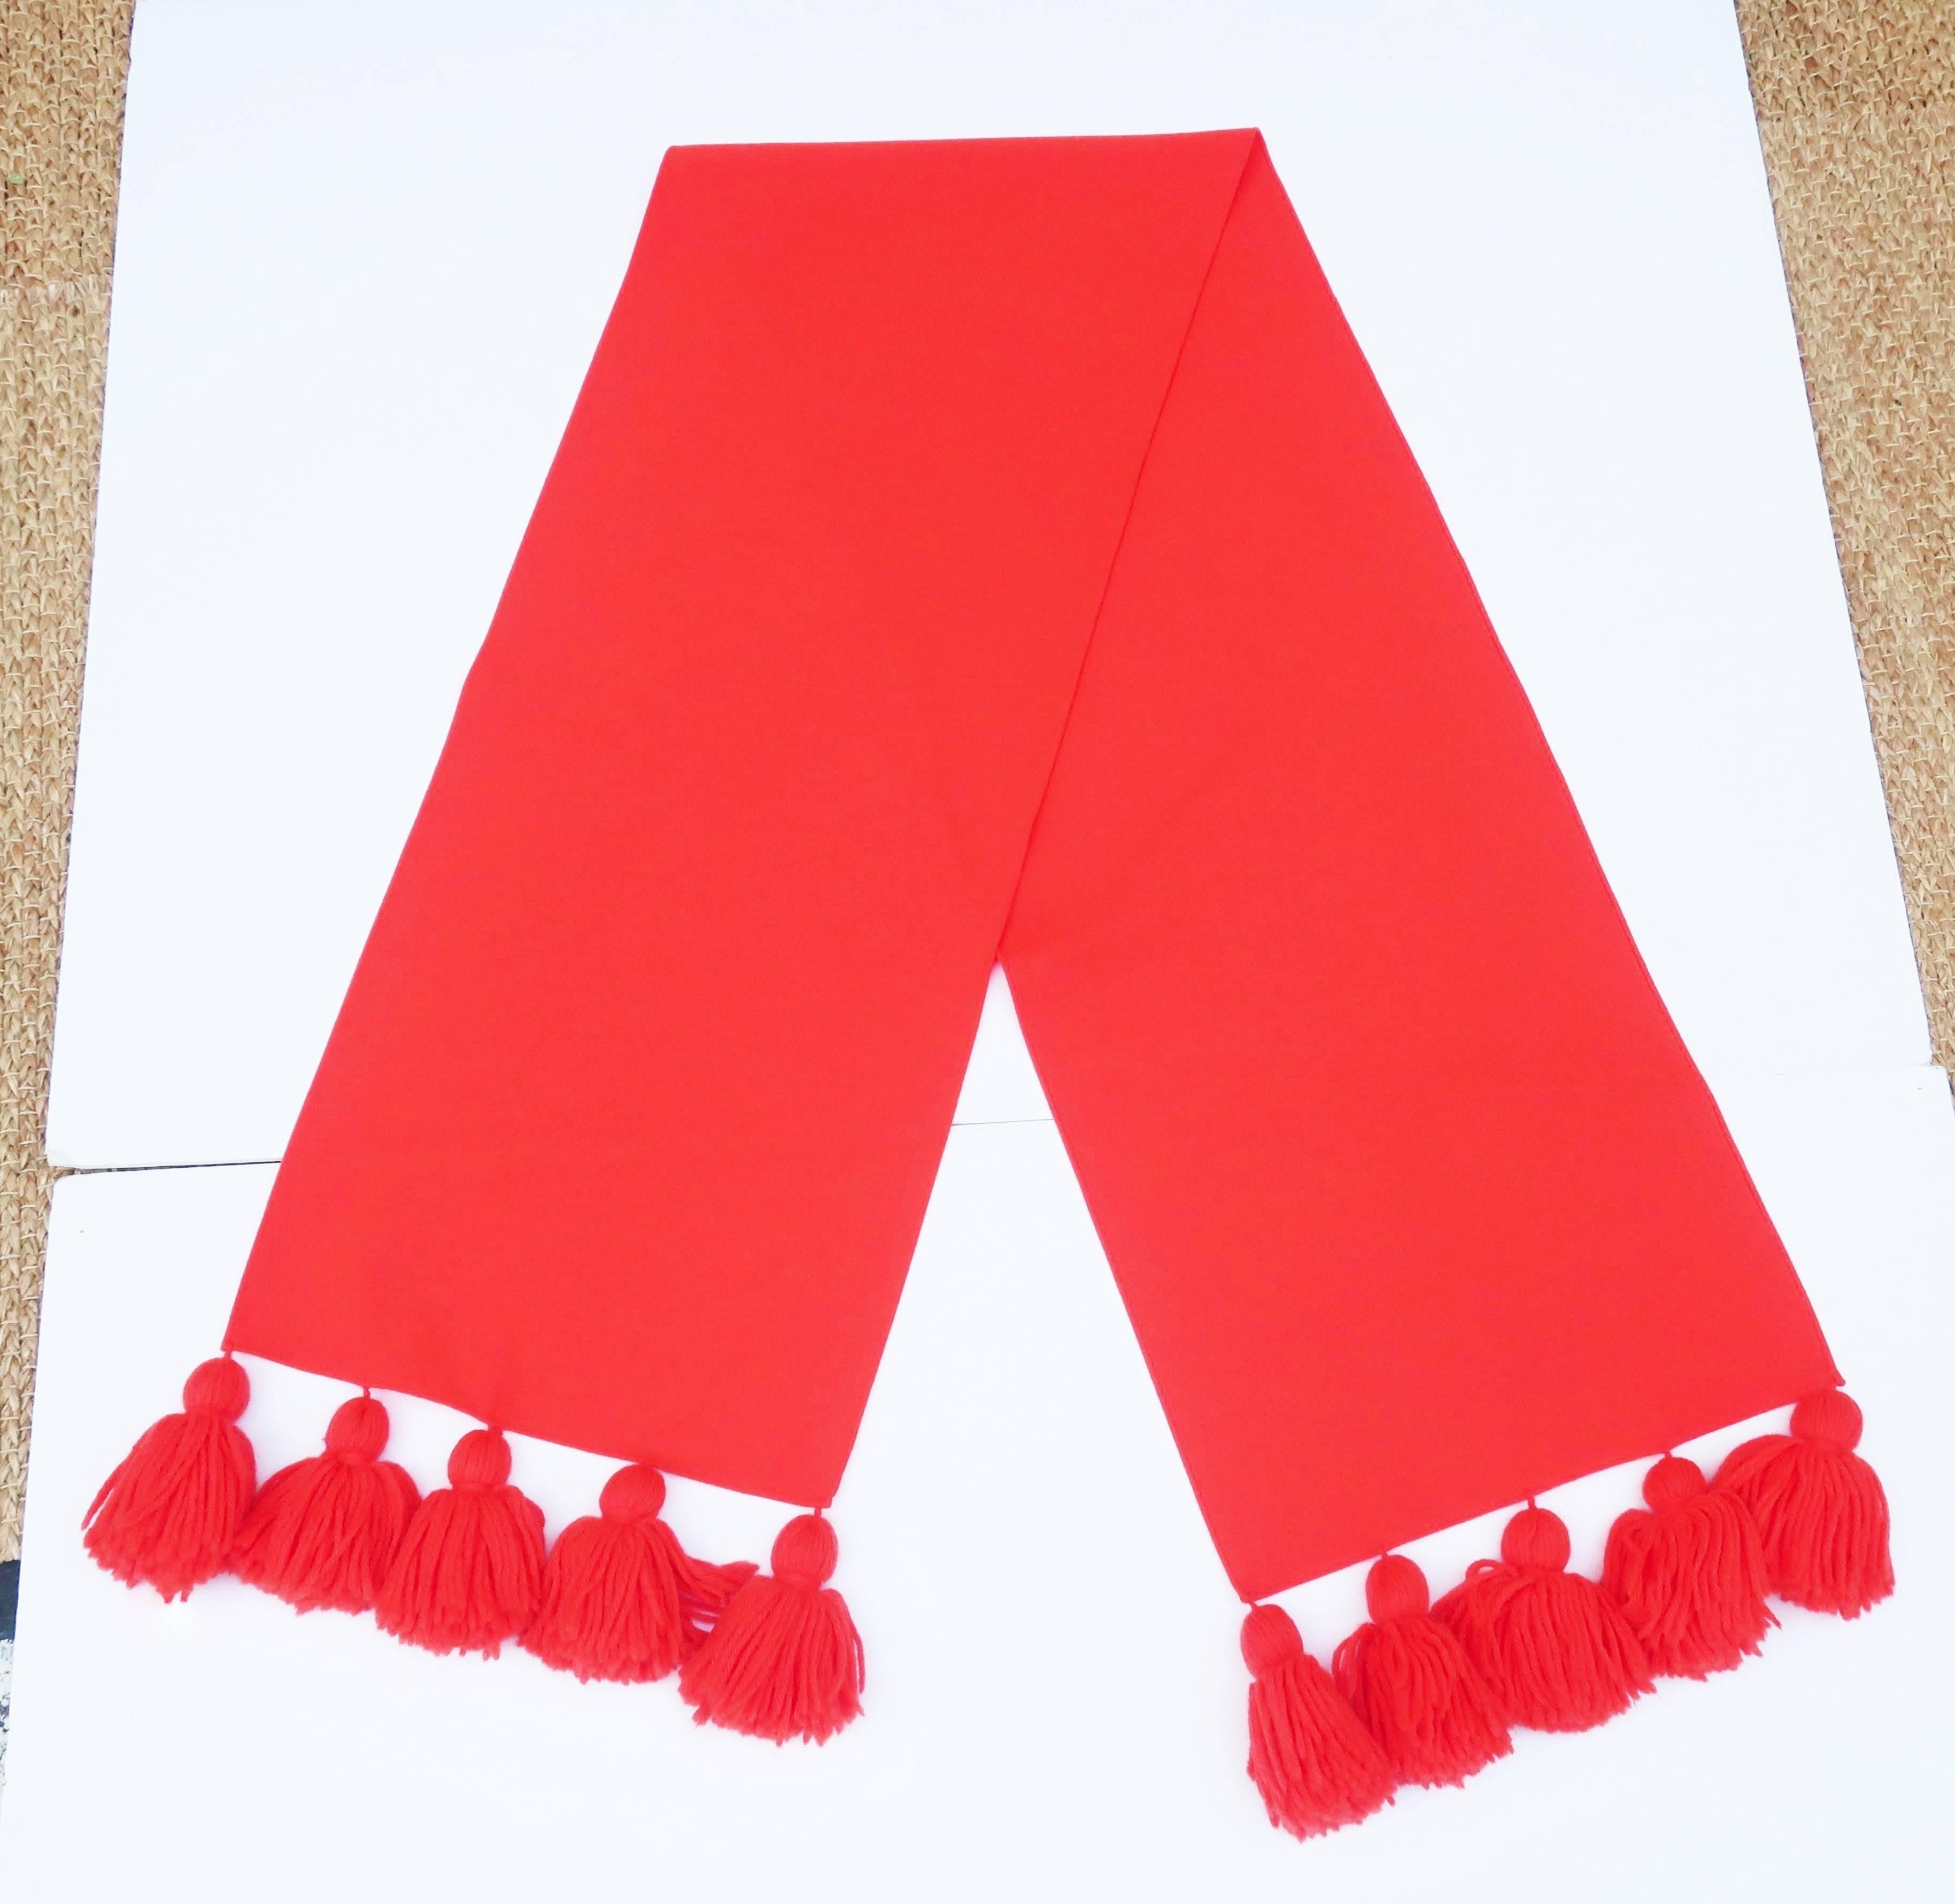 Get ready for some traffic stopping color!  Pair this extra long wool blend red scarf with your winter wardrobe for a fun color pop.  The 68" long scarf is embellished at each end with coordinating 5" long yarn pom poms for a total of